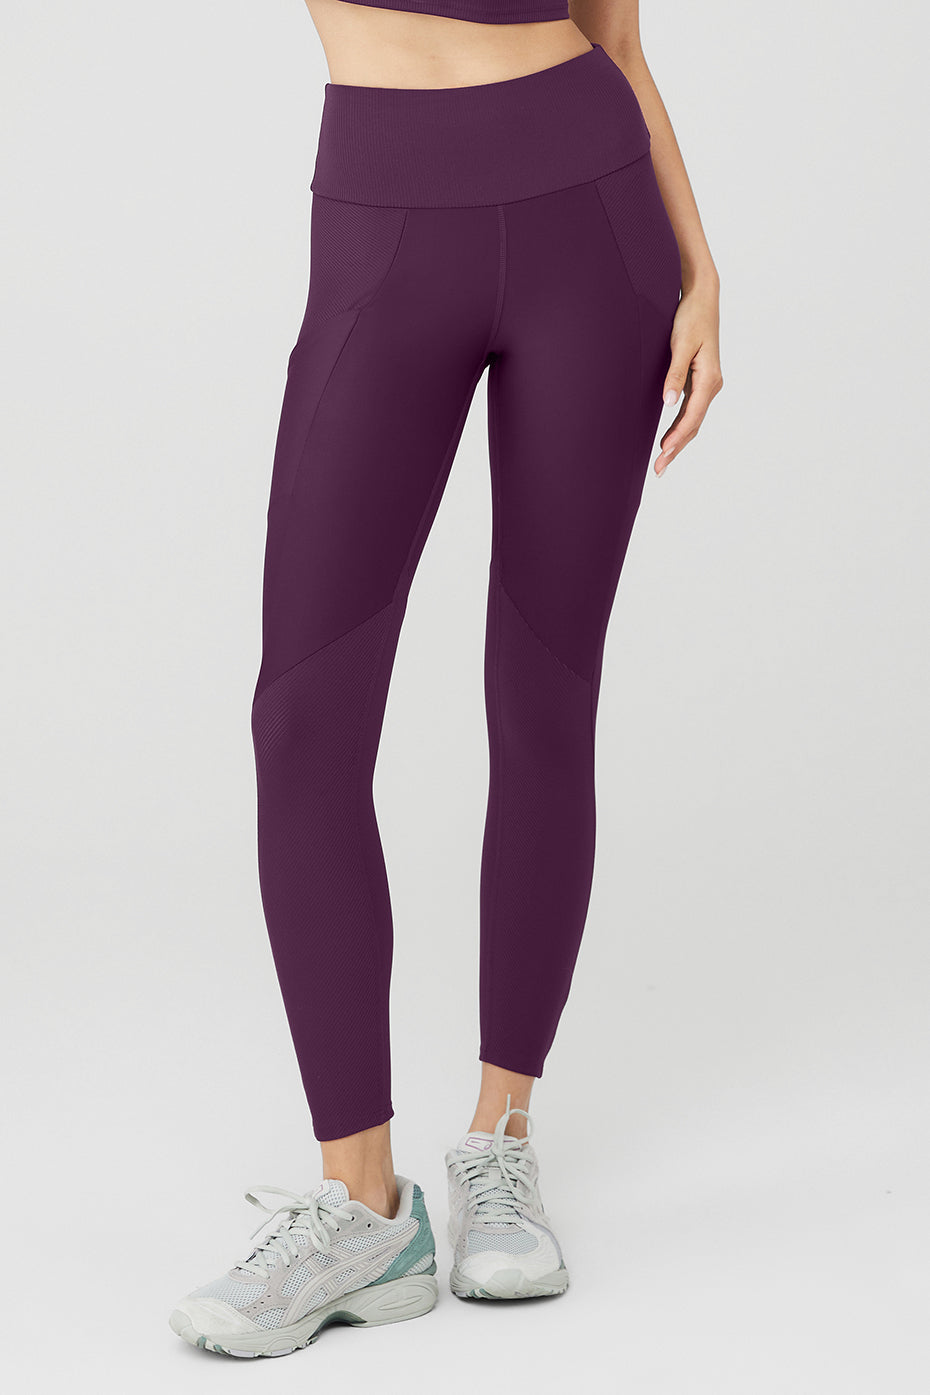 lululemon all the right places leggings size 4 - Athletic apparel